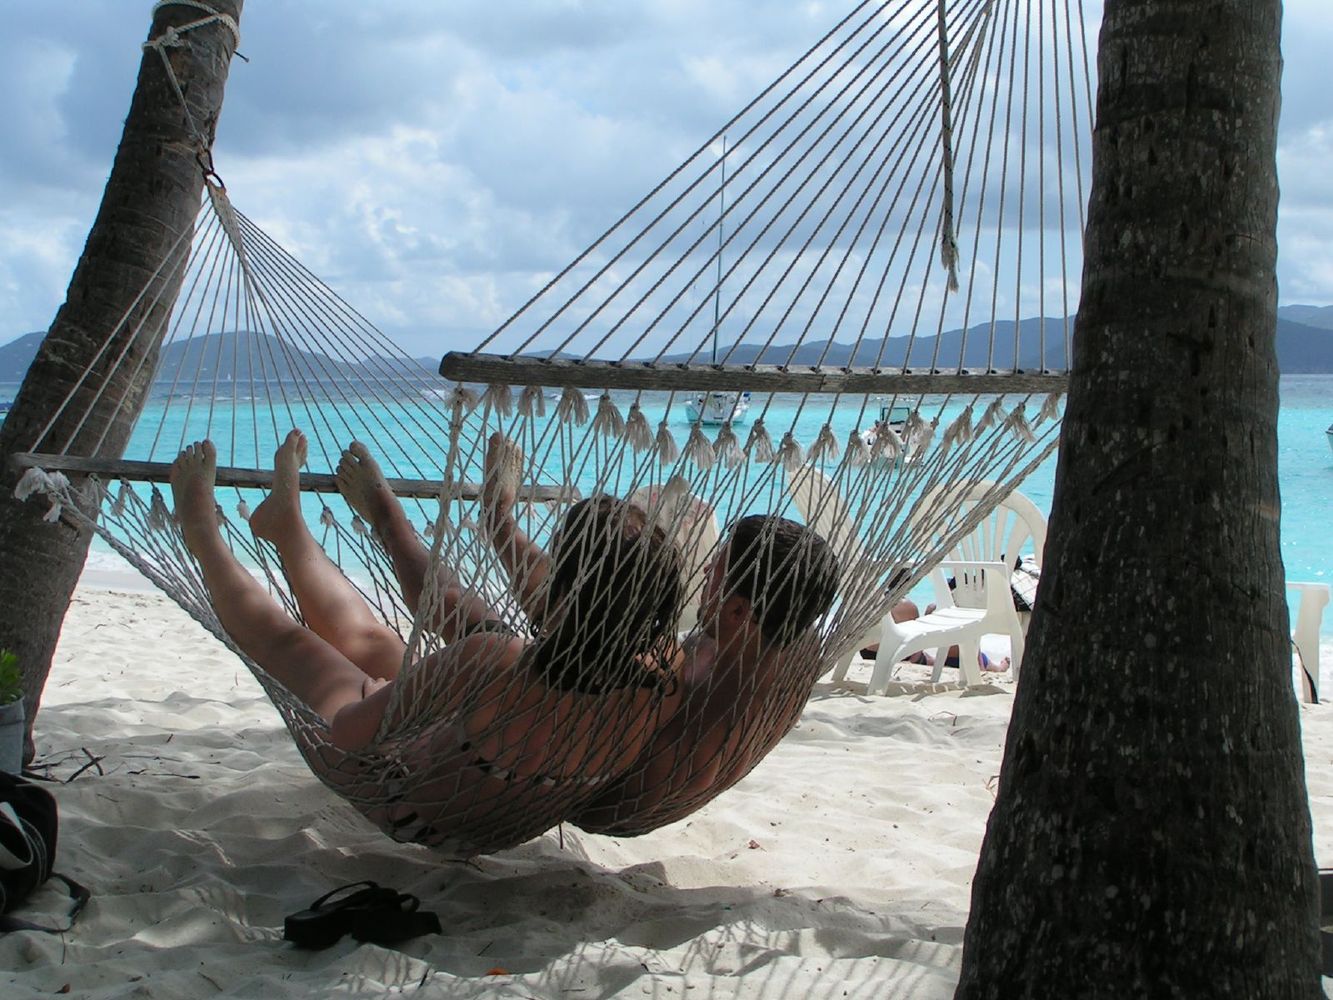 A couple in a Hammock.